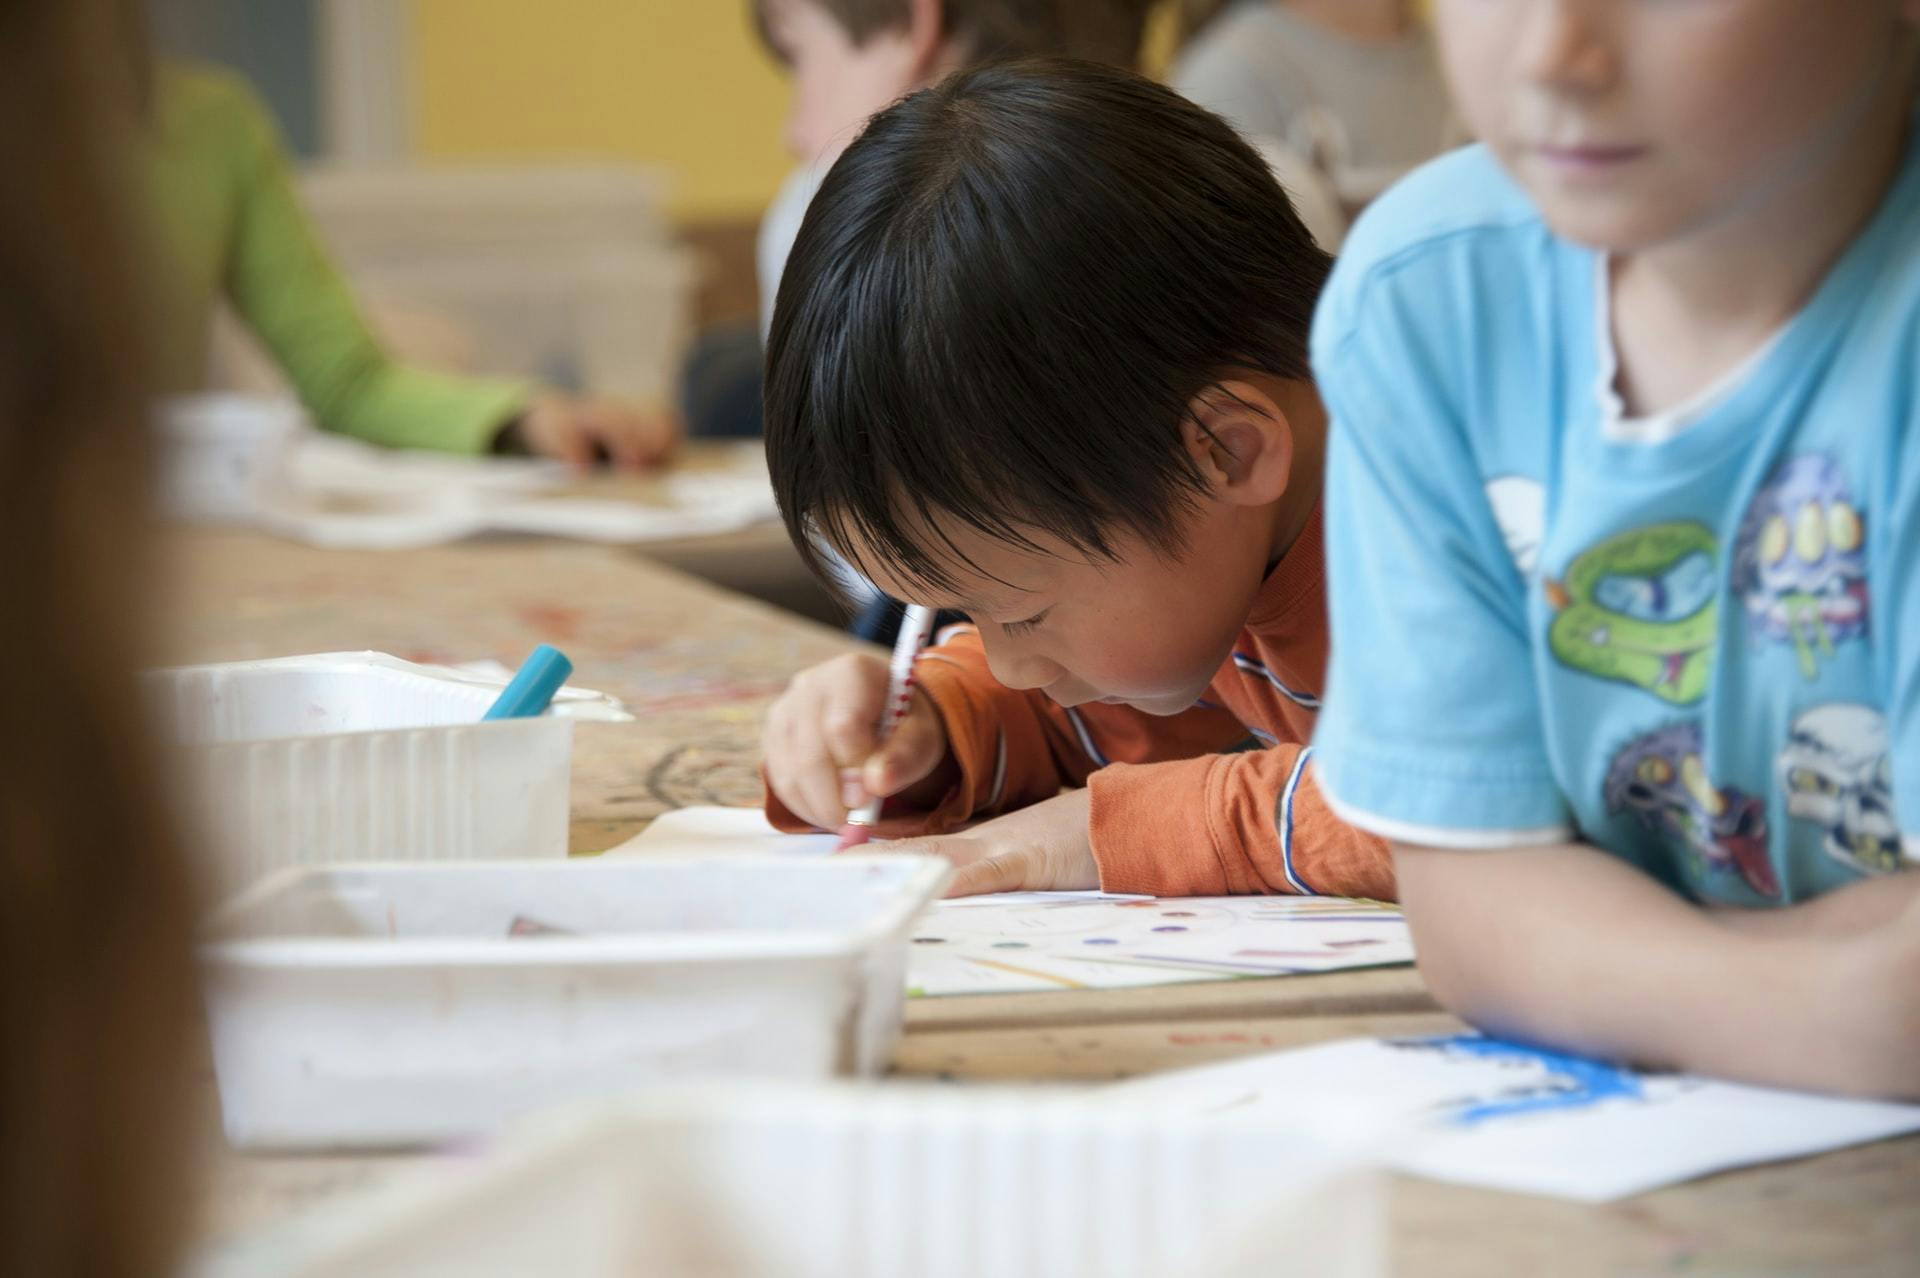 A young student, working at a table filled with other students, works on a vocabulary activities worksheet.